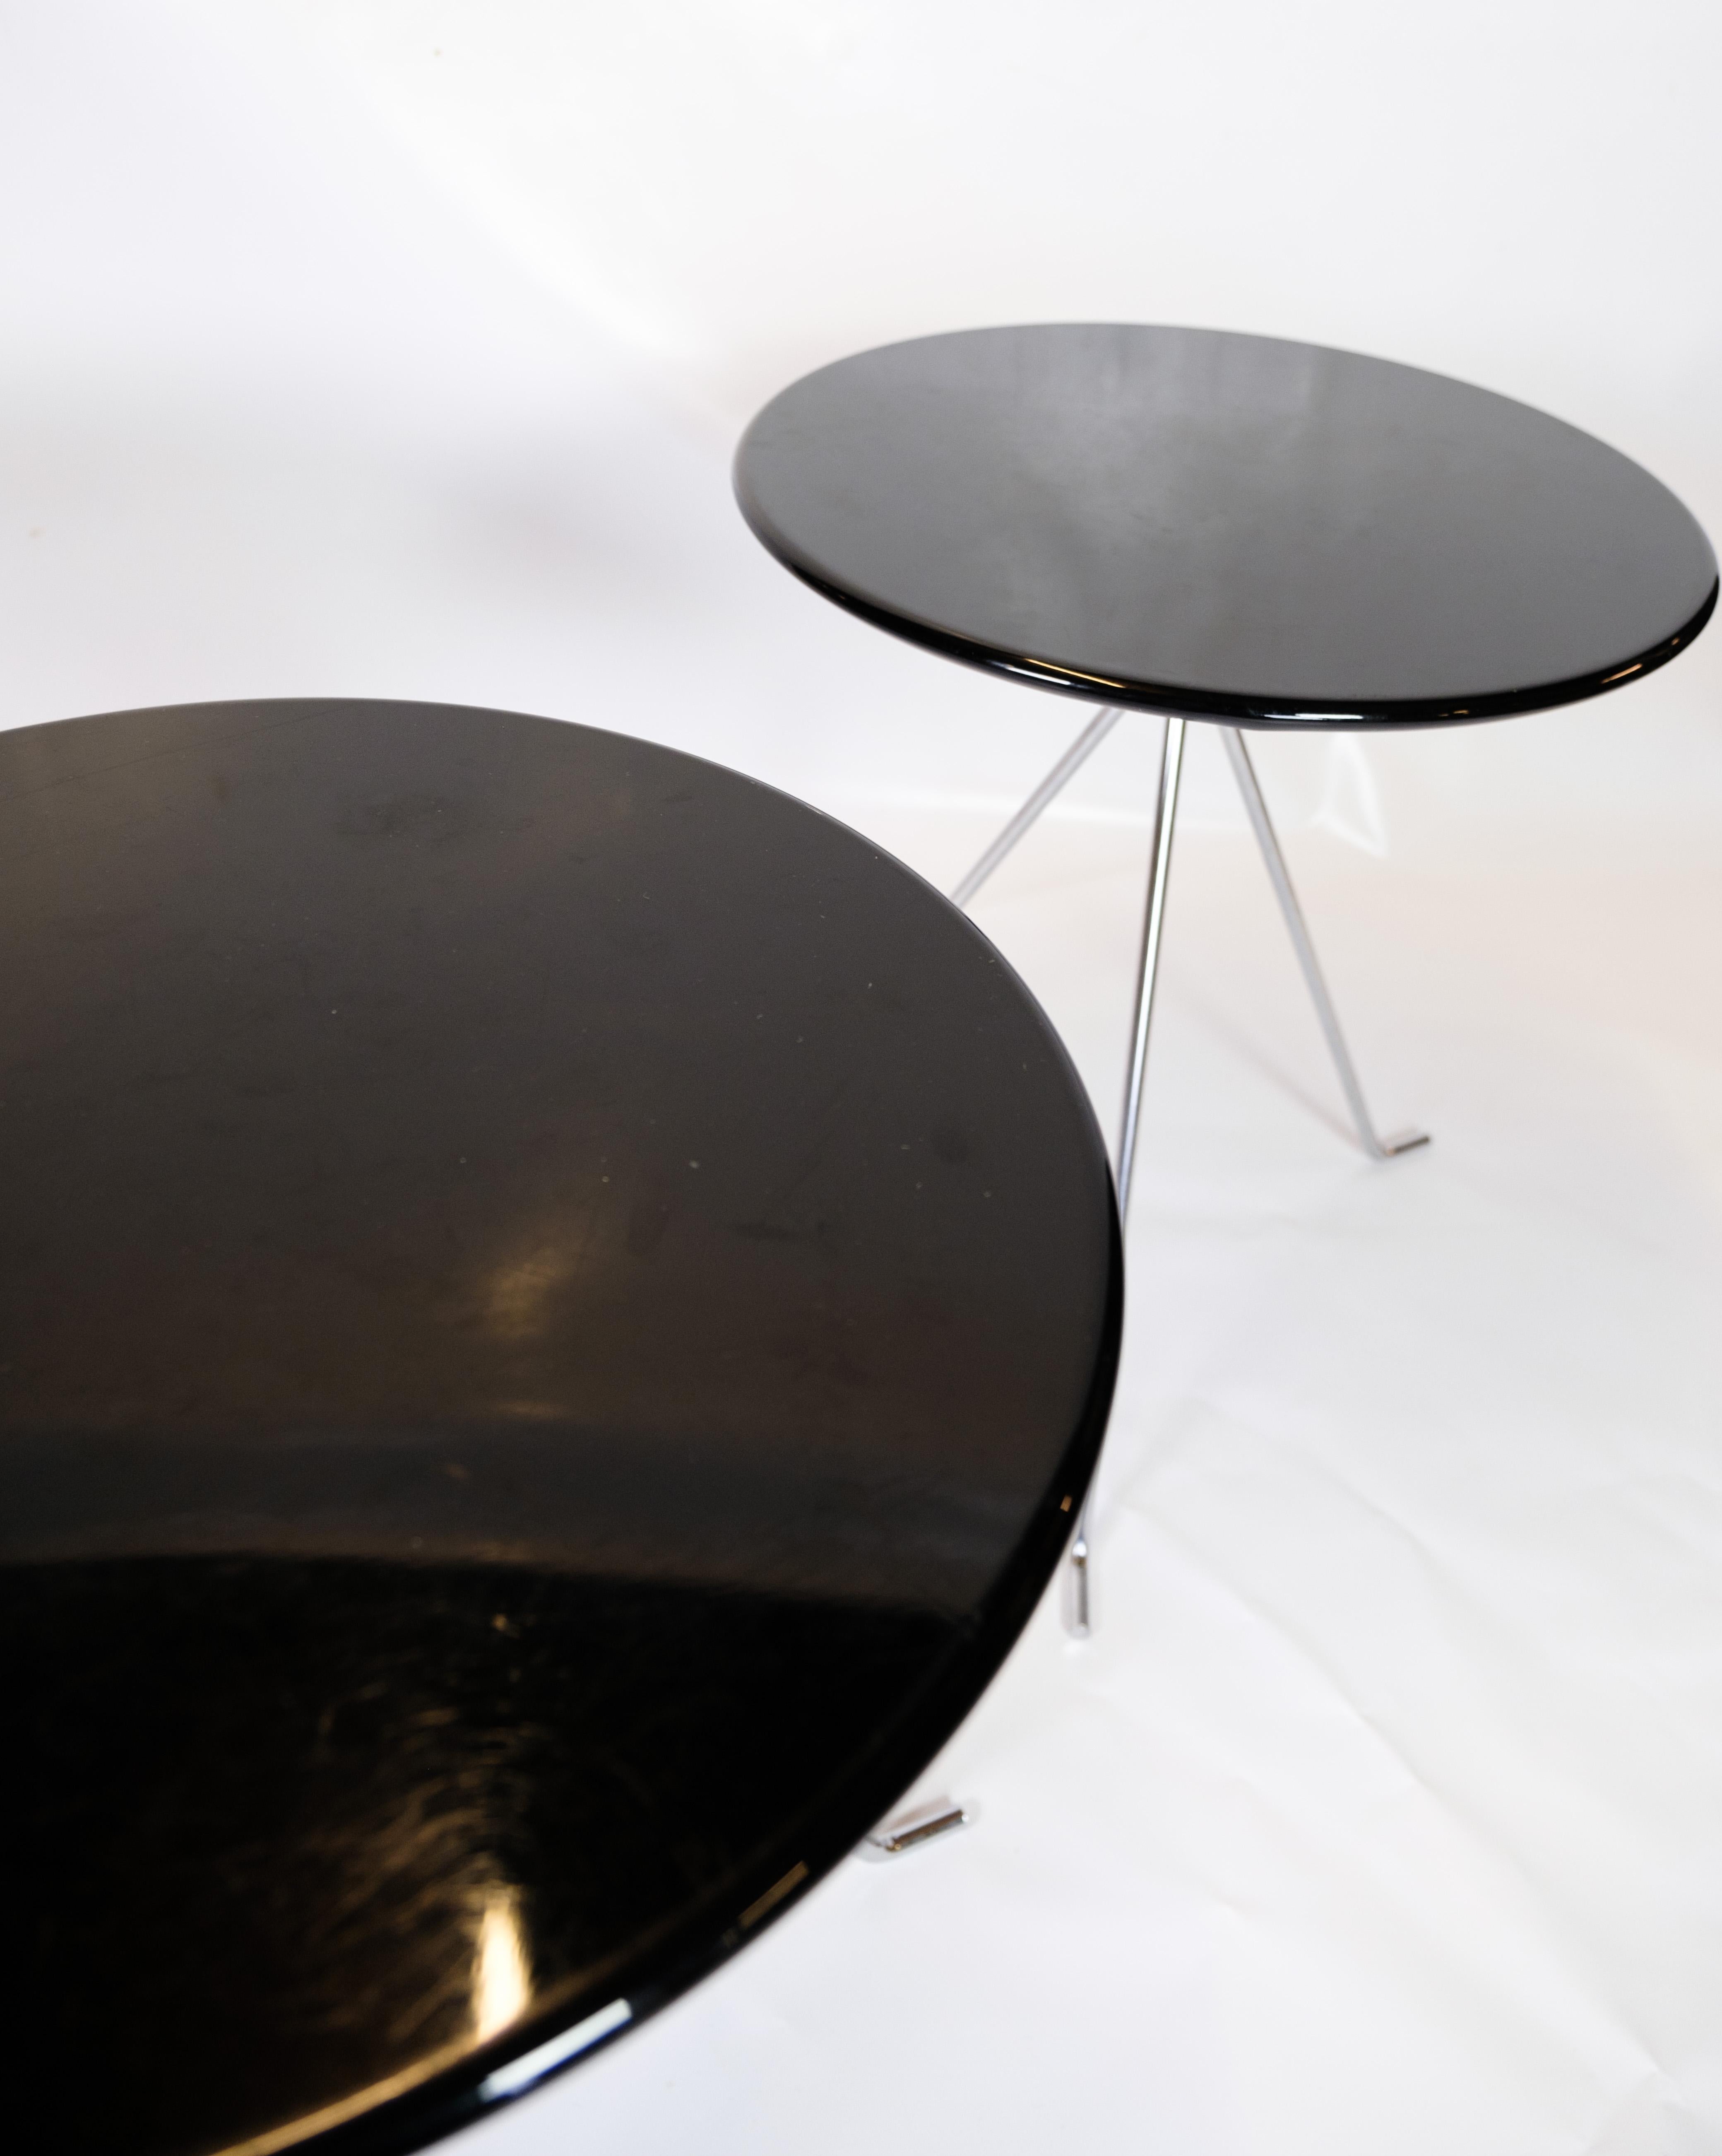 Coffee table set consisting of 3 small round tables with chrome legs with folding mechanism and black surface, originally from Denmark.
Measurements in cm: H:55 Dia: 48